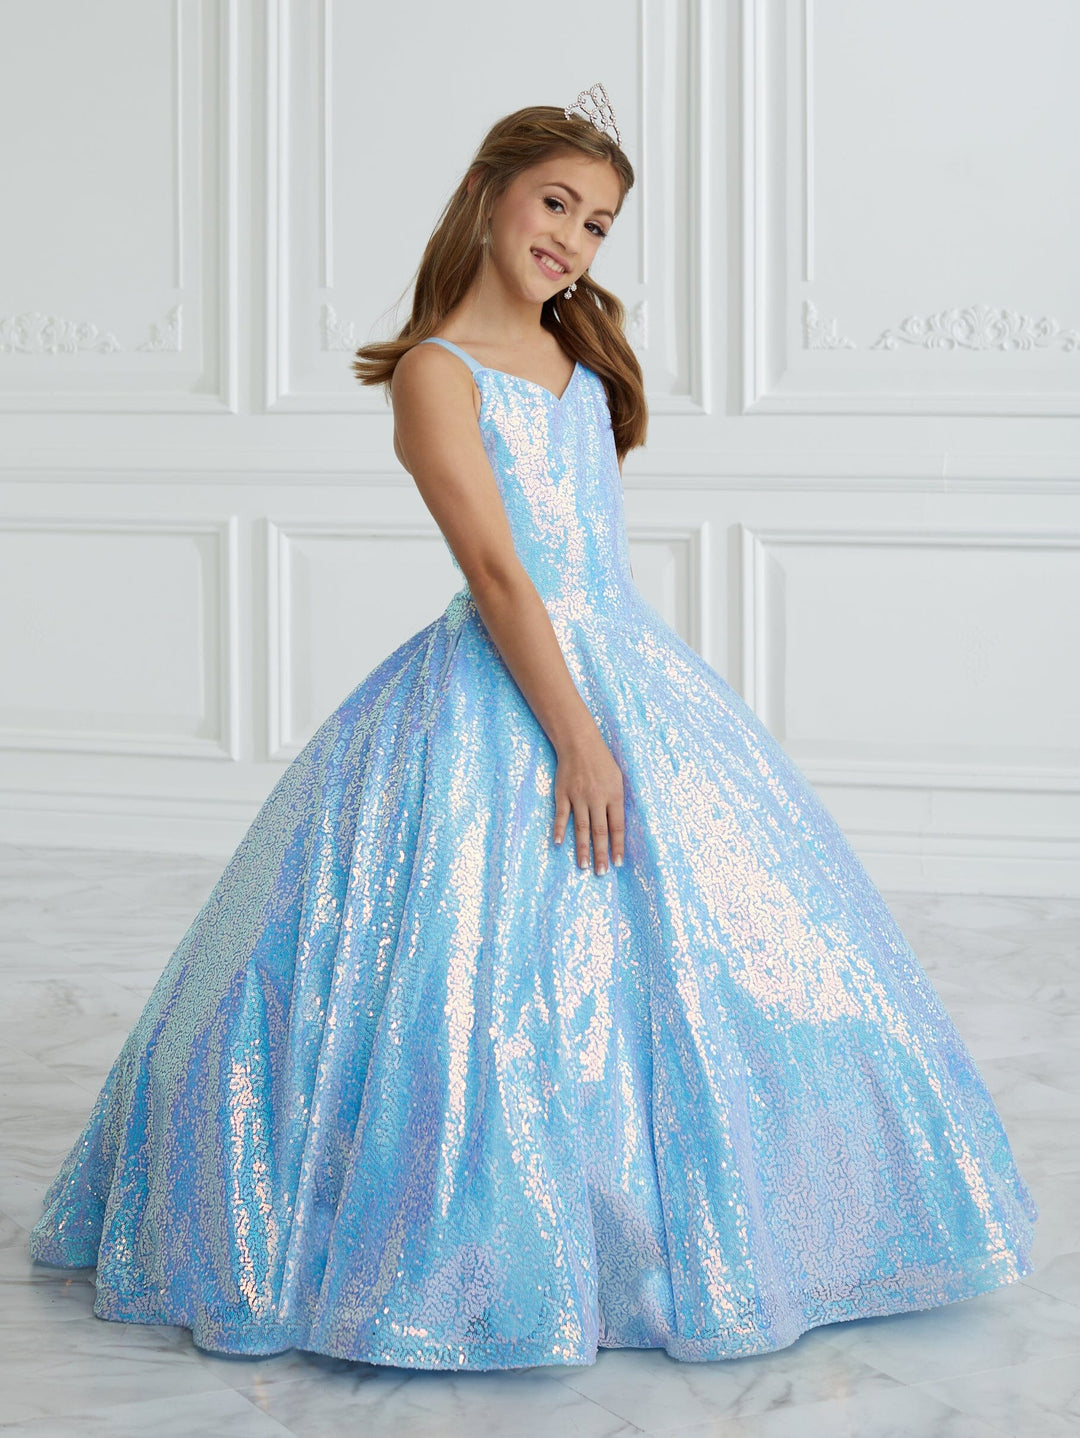 Girls Sequin V-Neck Gown by Tiffany Princess 13675